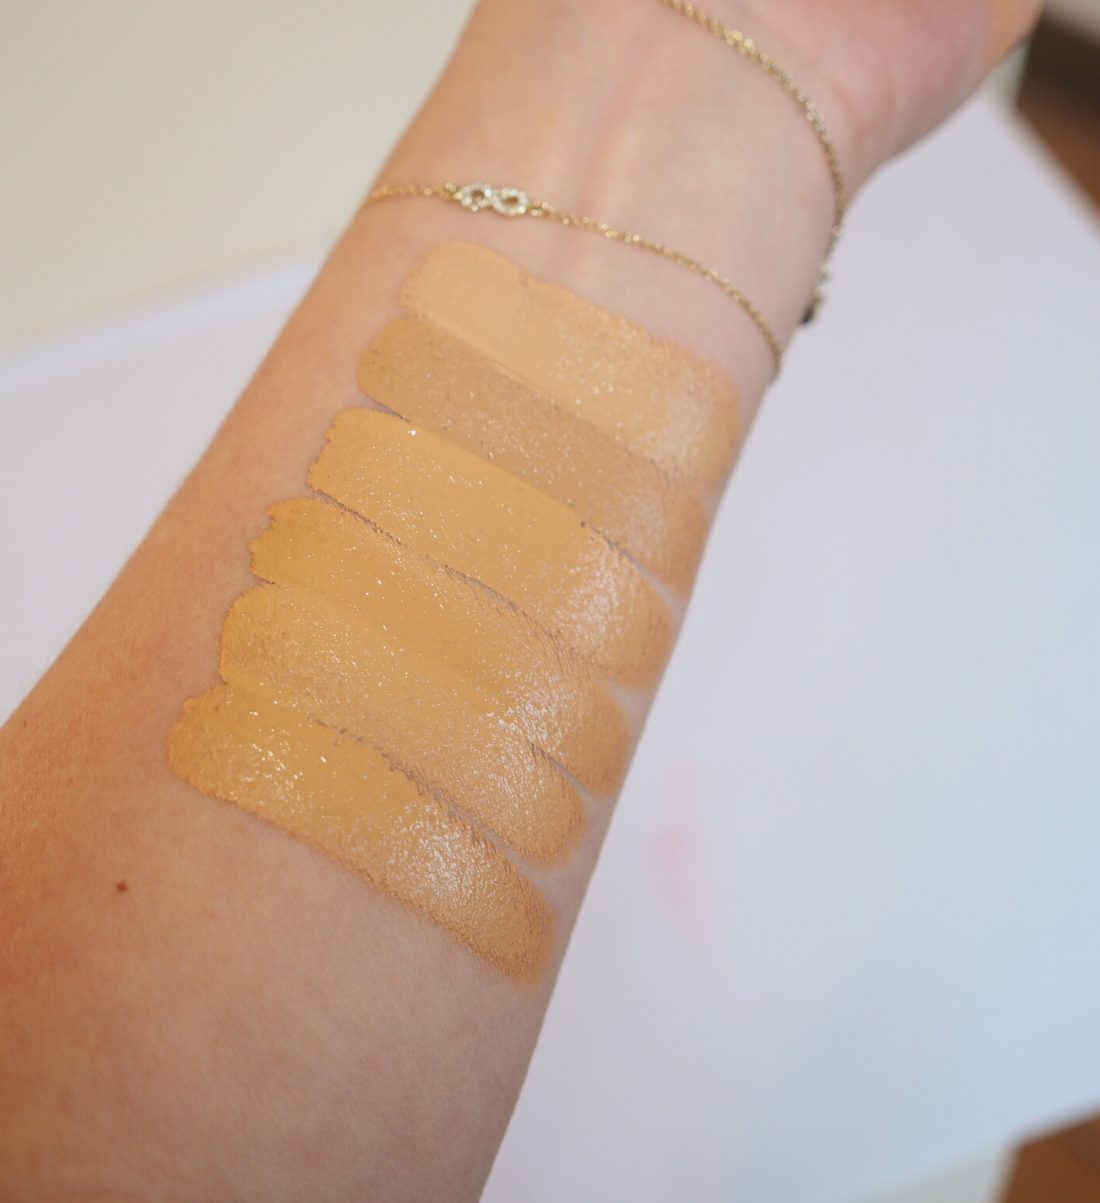 AD Clinique 2-in-1 Beyond Perfecting Foundation Concealer: Golden | British Beauty